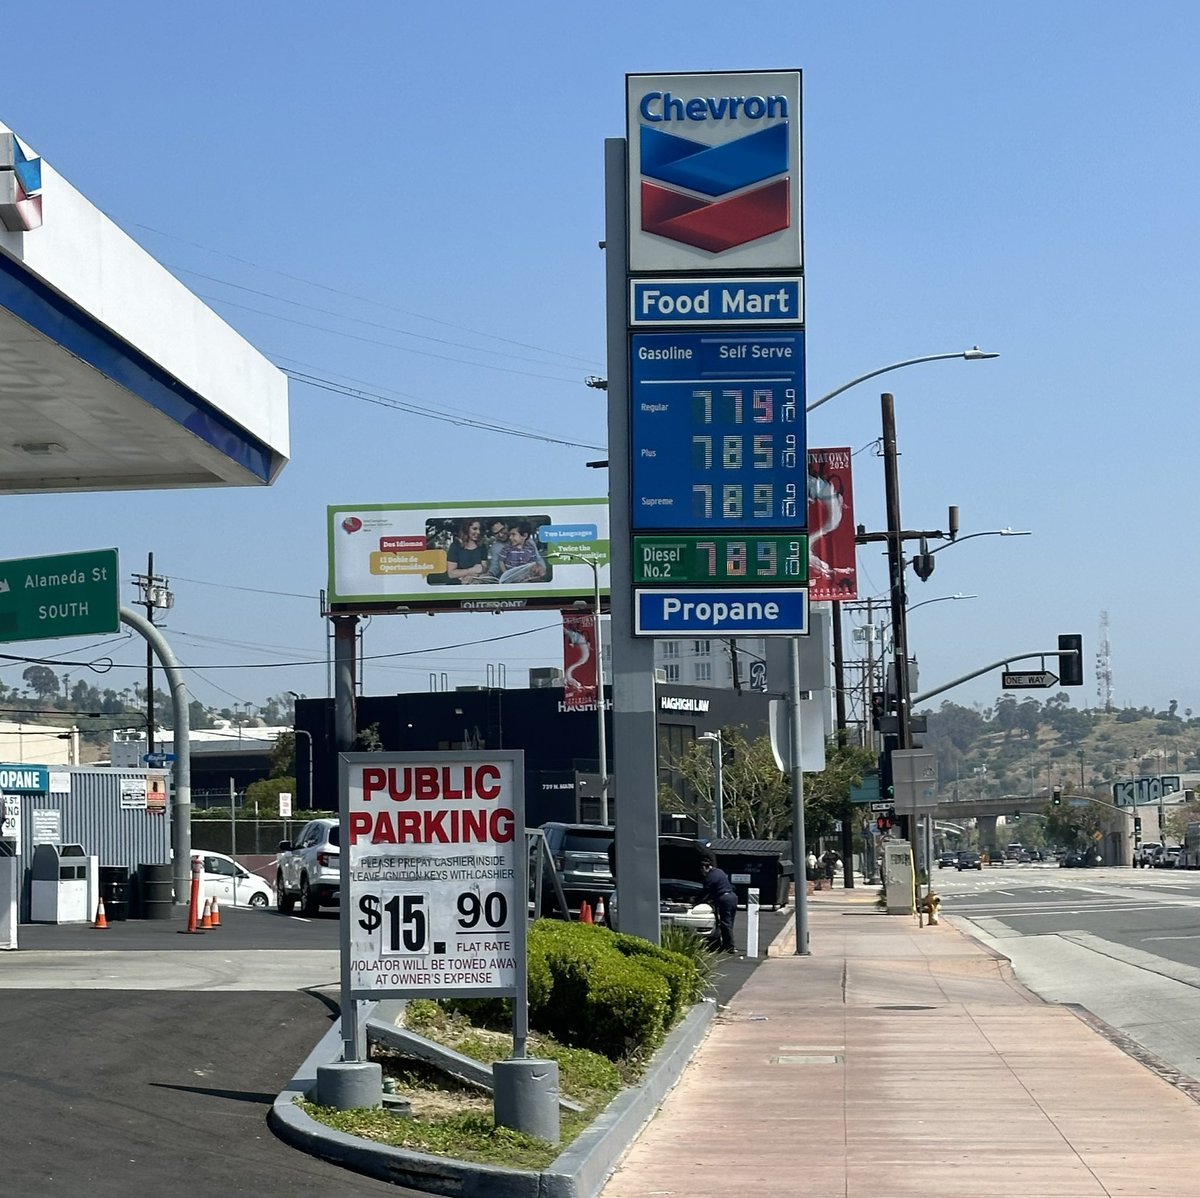 Hey California Democrats - you like those $7.89 gas prices?

Keep voting blue you clowns